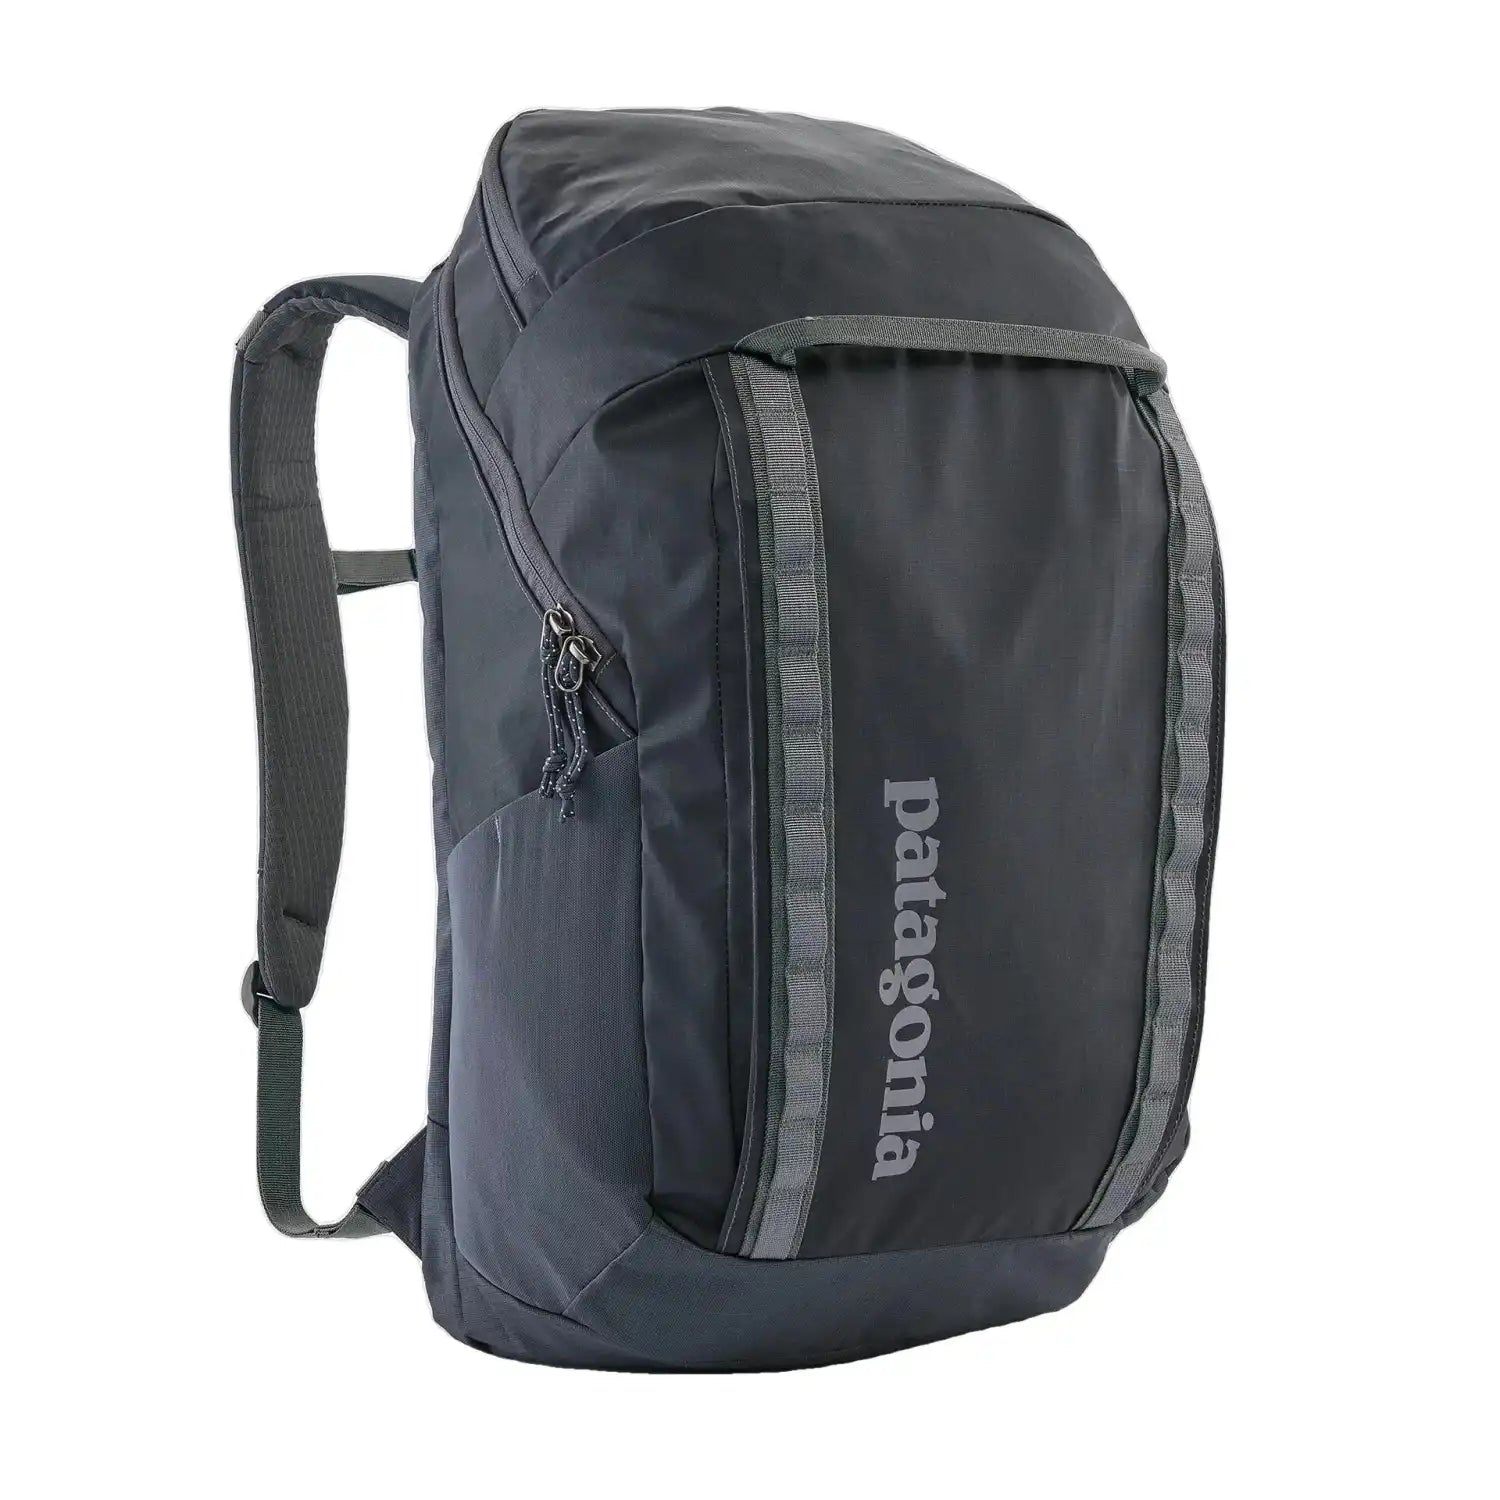 Patagonia Black Hole® Pack 32L shown in Smoulder Blue option on angle view.